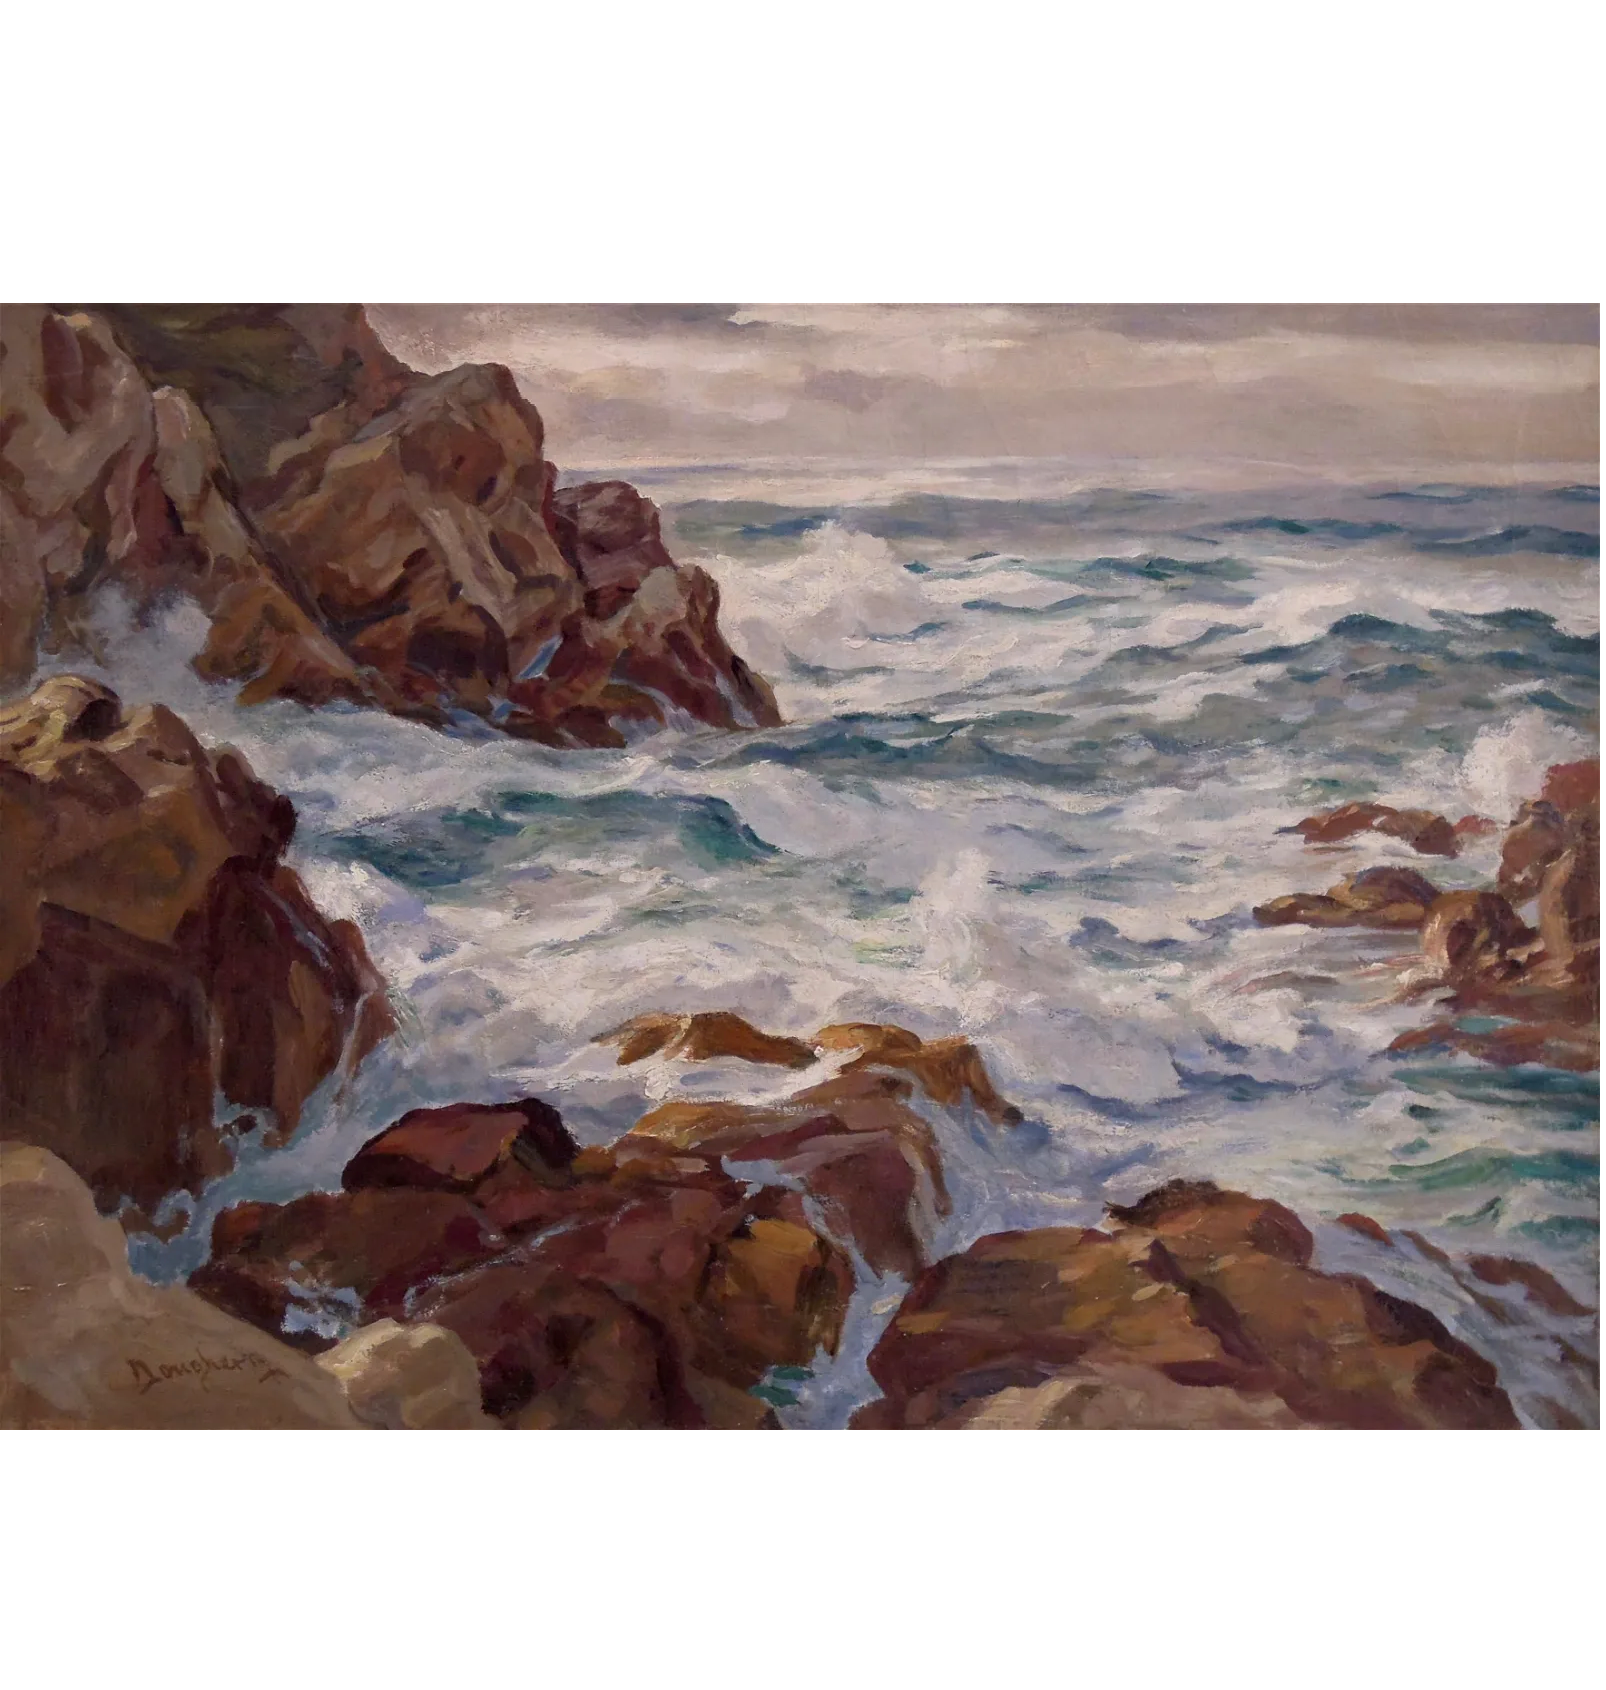 AW613: Paul Dougherty, "Foaming Seas" - Early 20th C Oil on Canvas